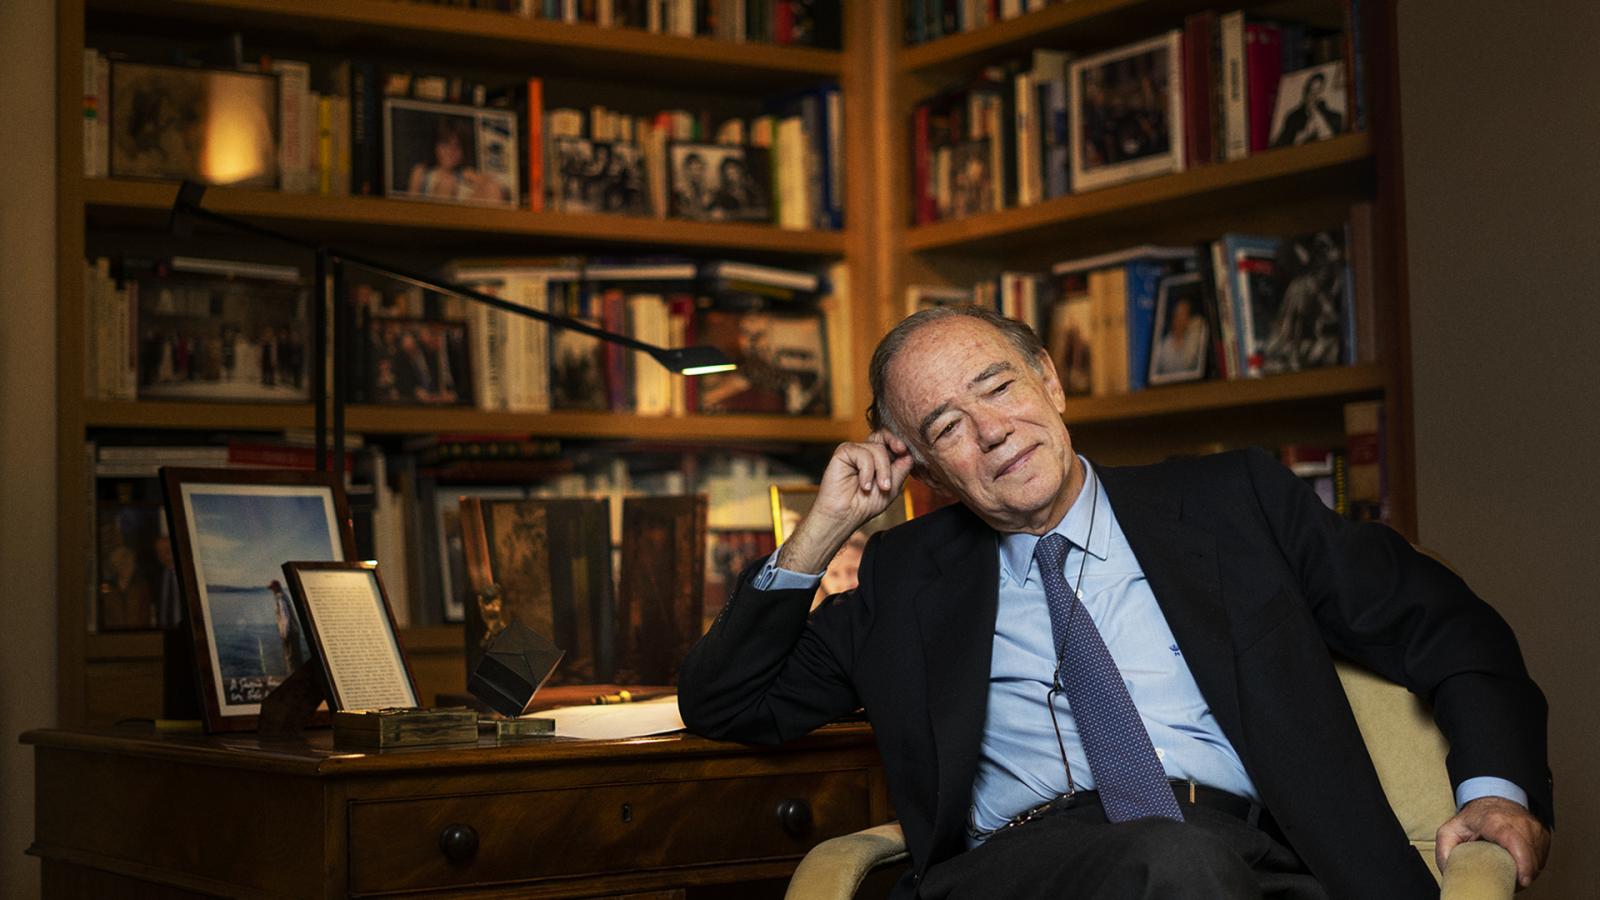 Image from Overview - Portrait of the President of the Teatro Real in Madrid,...